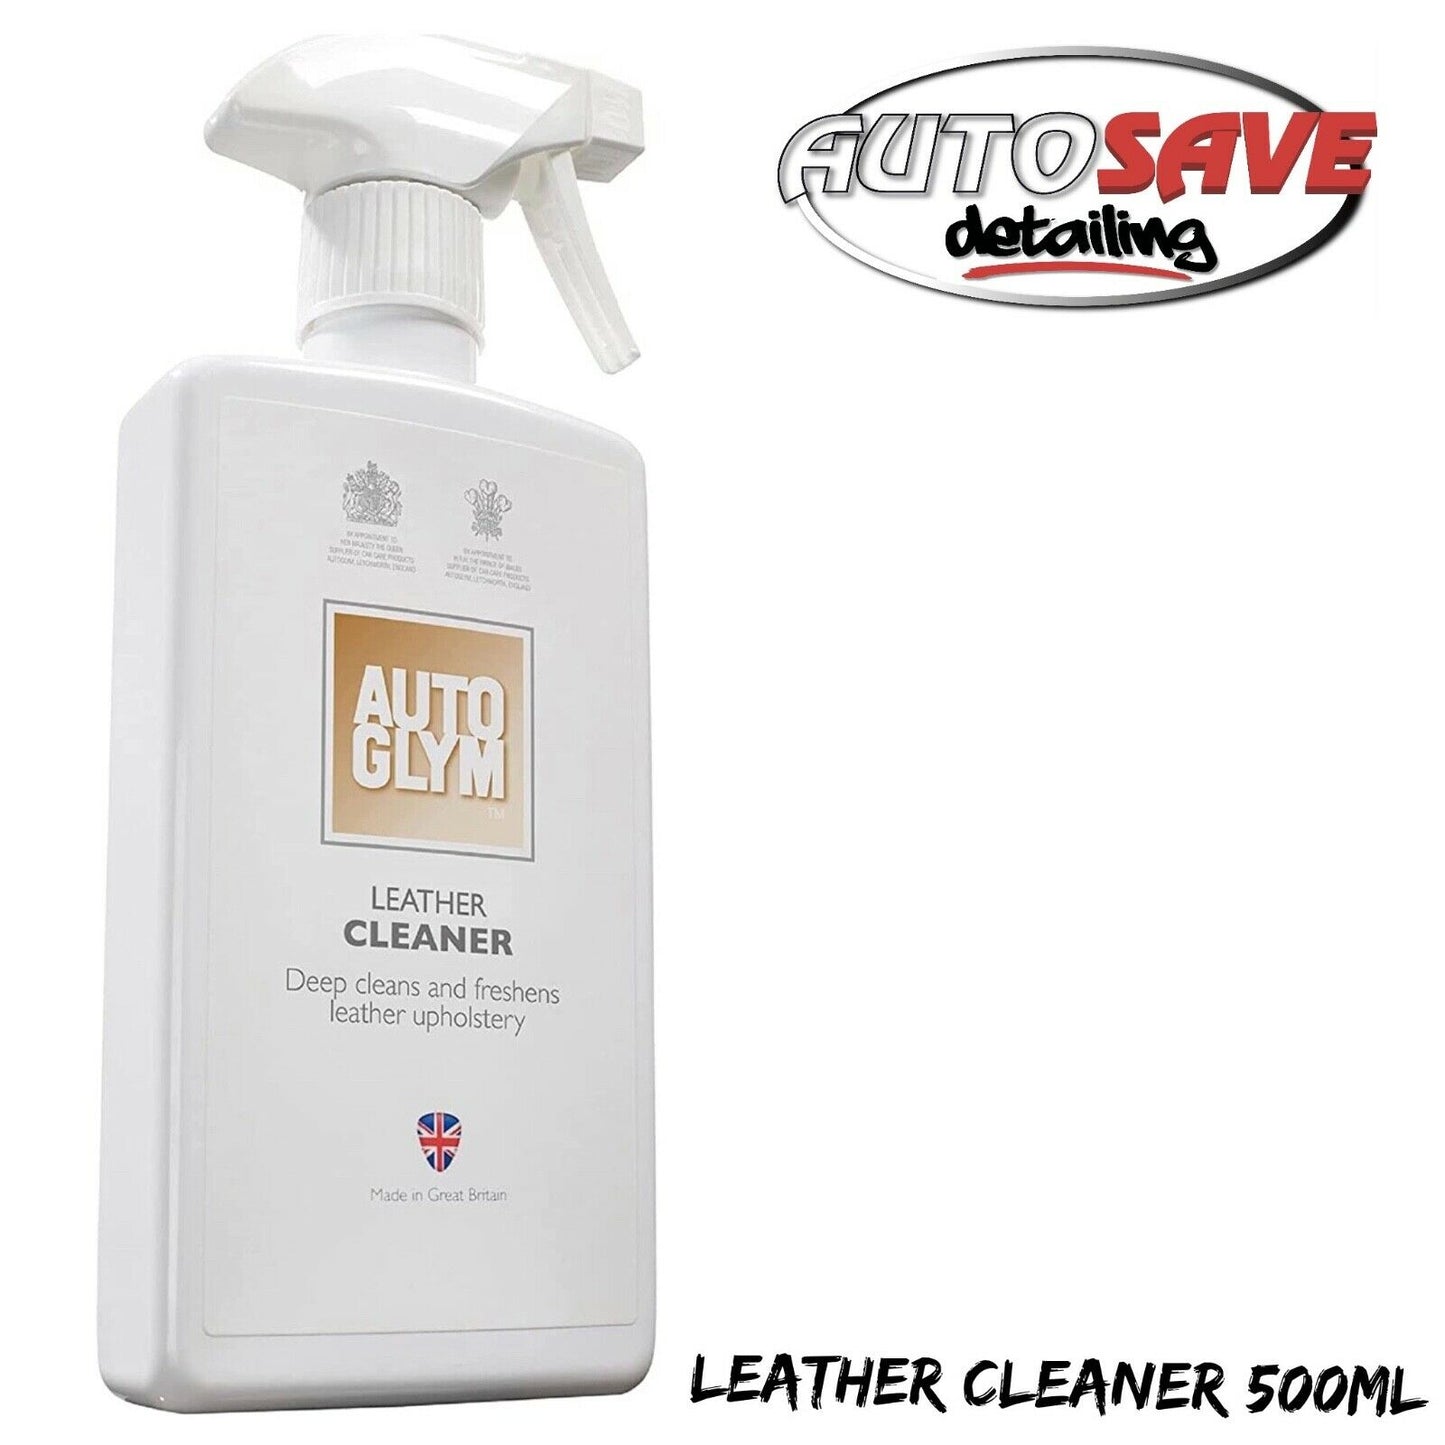 Autoglym Leather Cleaner Car Care Valet Spray Interior Clean Upholstery 500ml